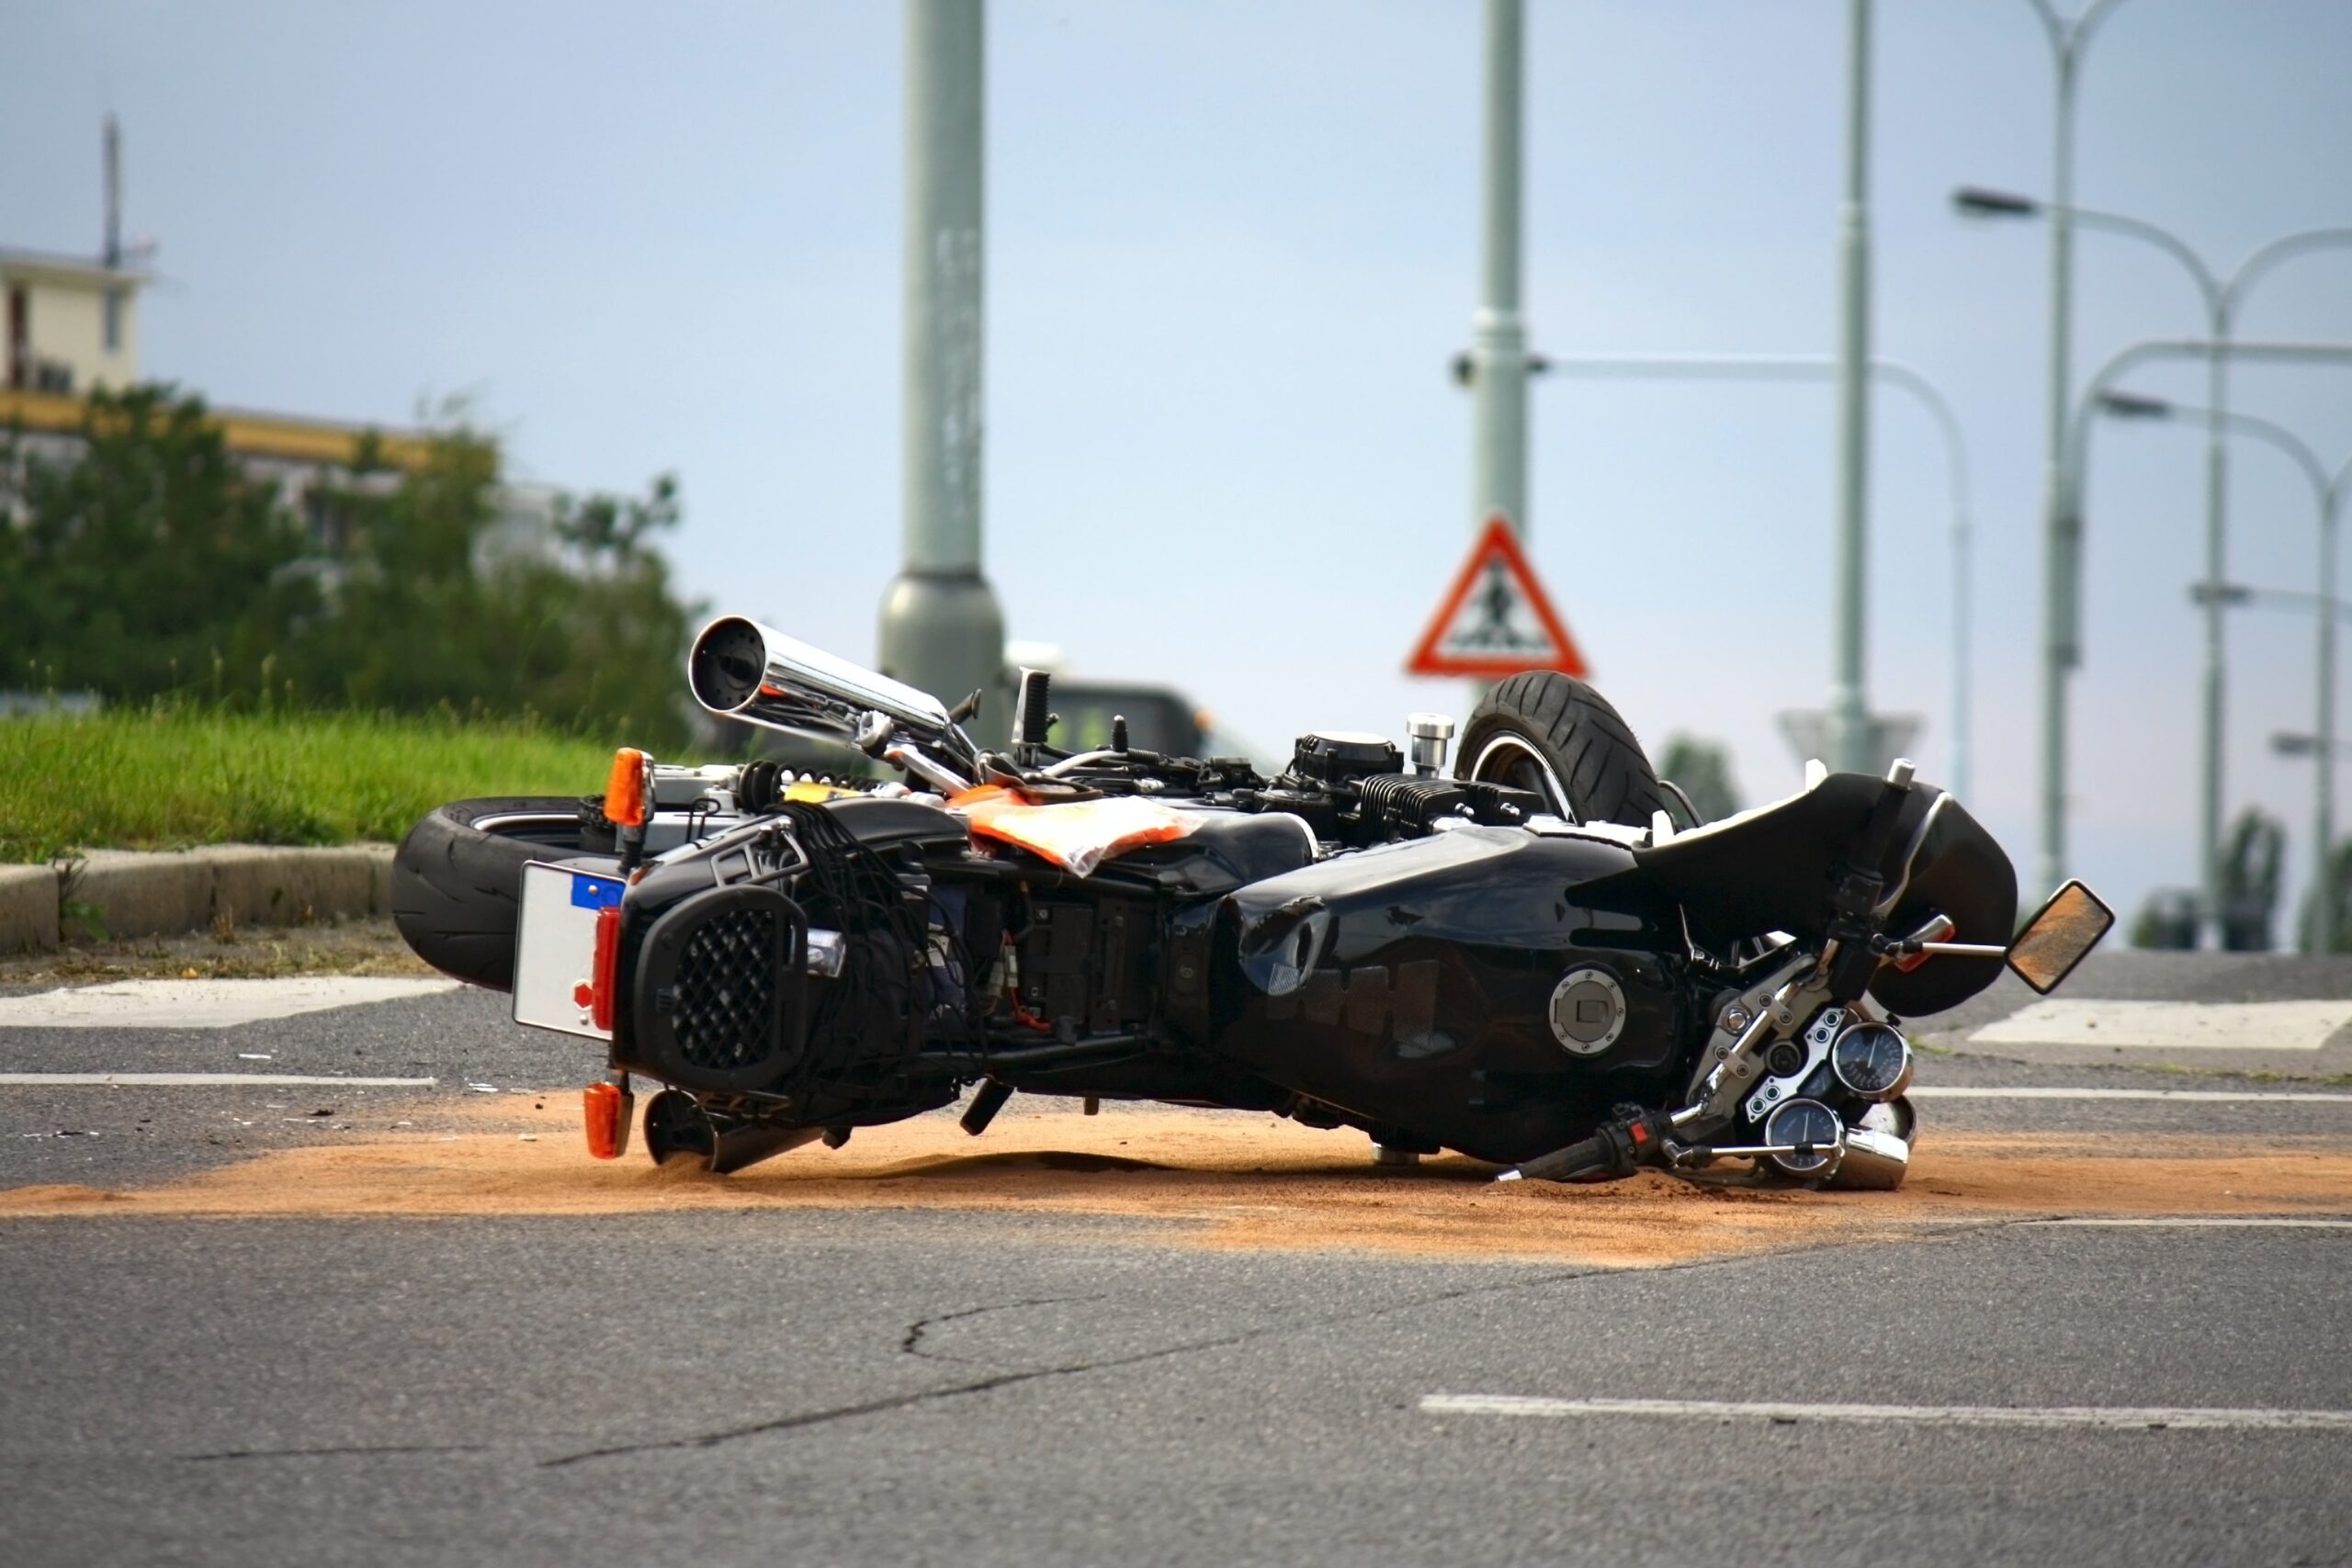 Understanding Motorcycle Accident Claims and Legal Rights